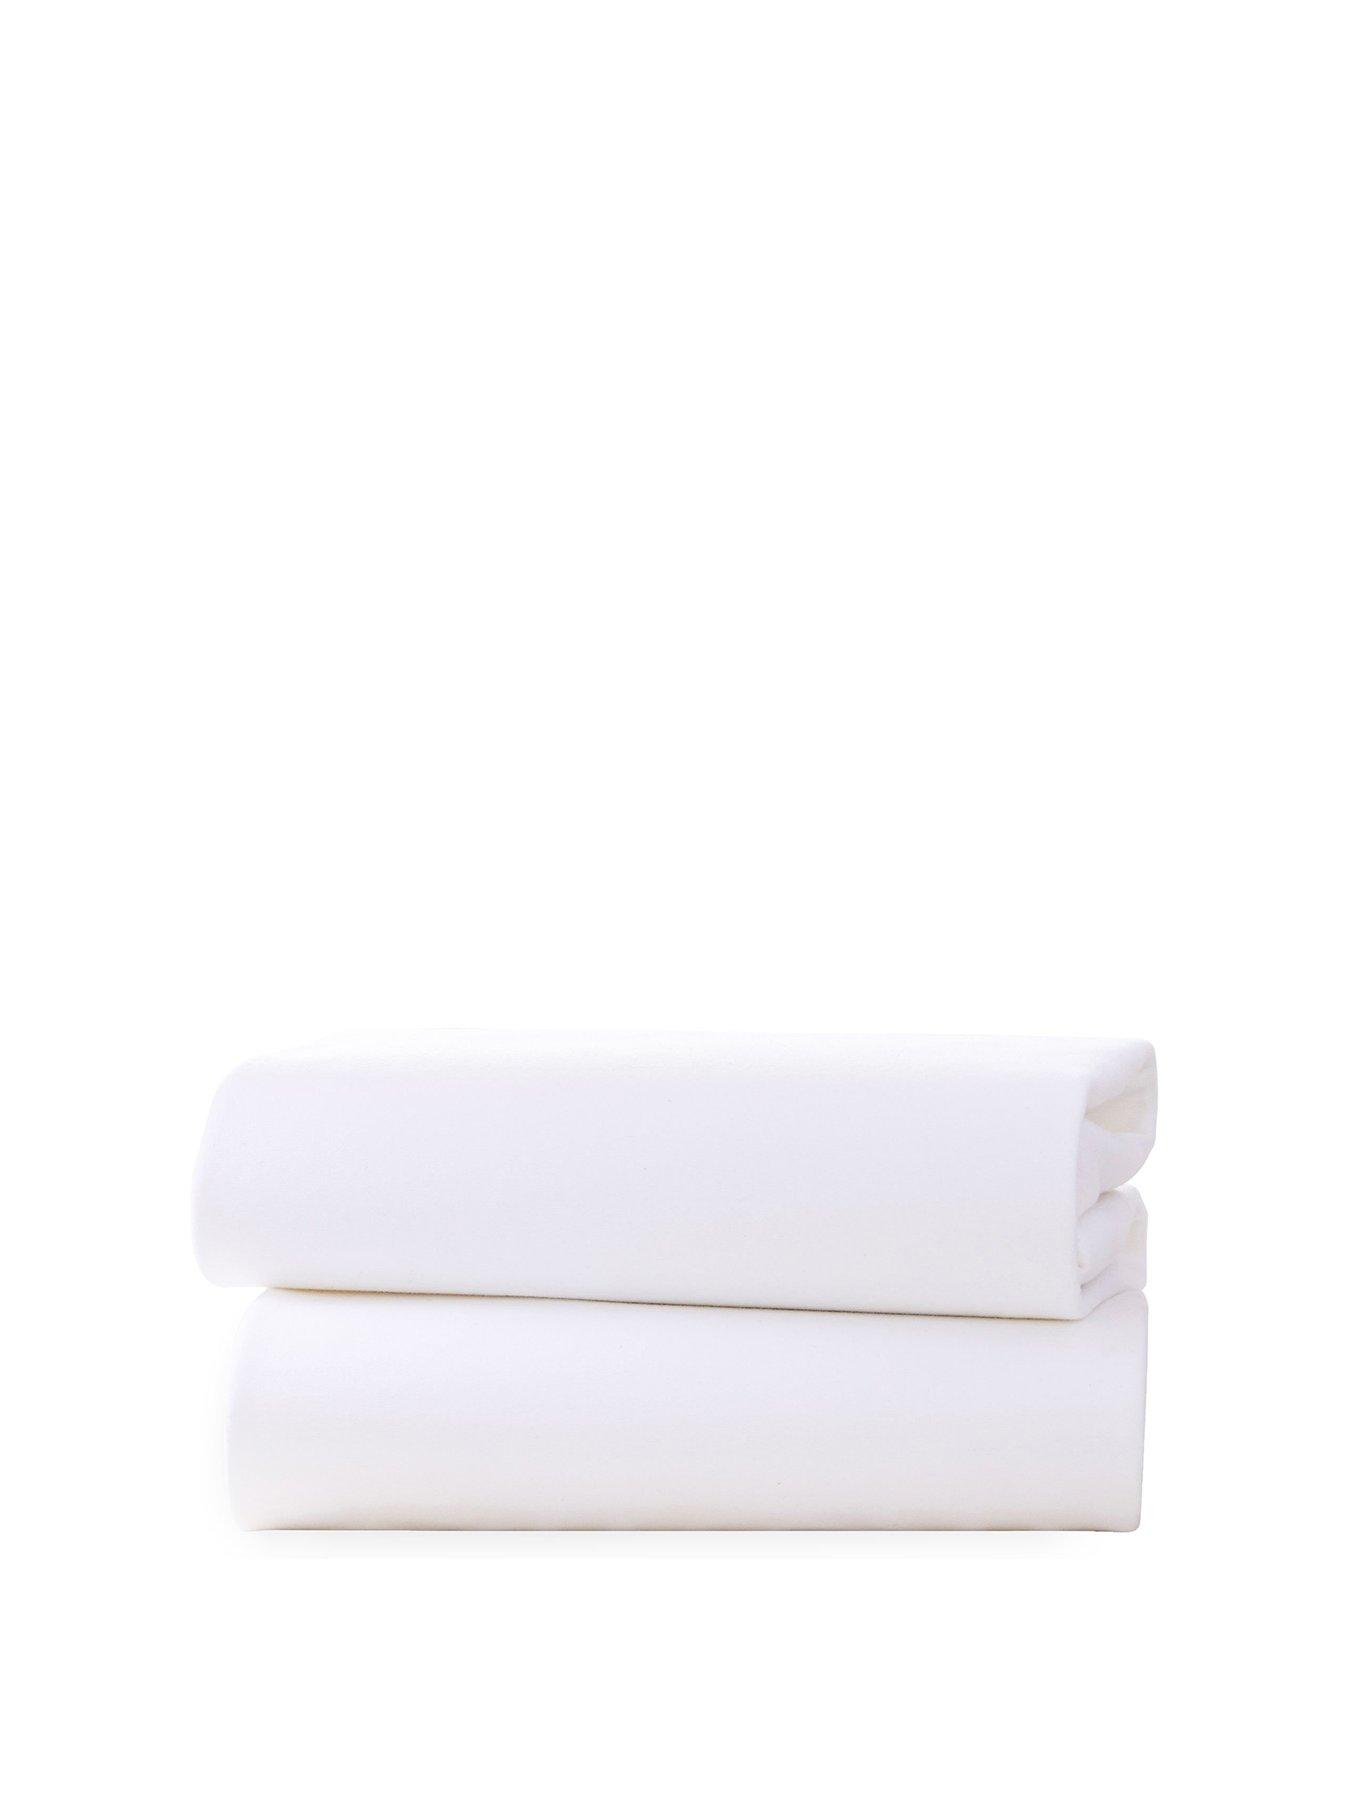 LOT of 5 Mothercare 2 Pack 100% Cotton Jersey fitted sheets 28 cm x 75 cm 